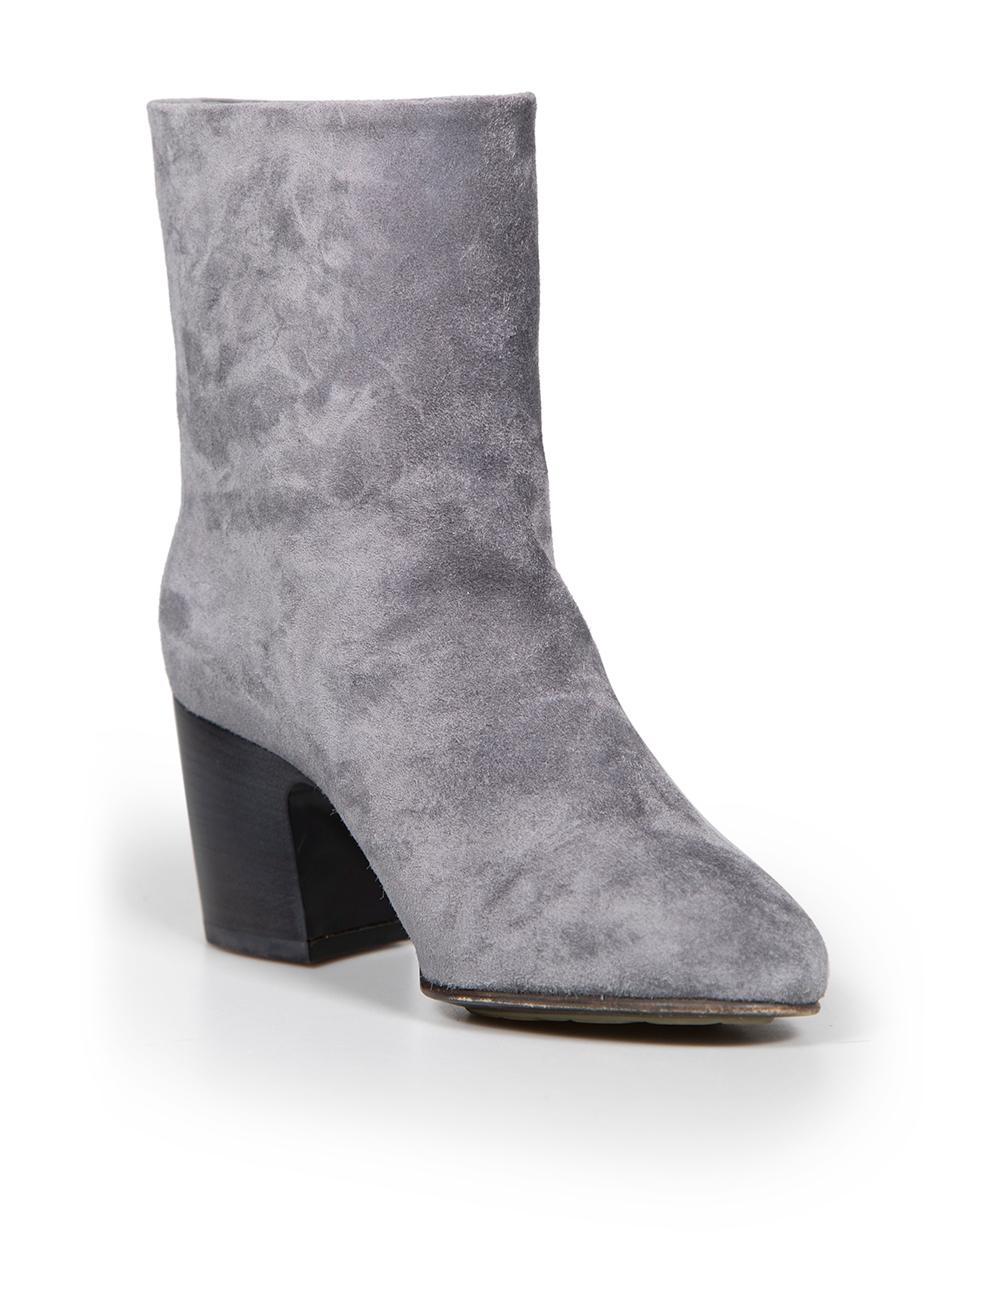 CONDITION is Very good. Minimal wear to boots is evident. Minimal wear to soles on this used Chanel designer resale item. These shoes come with original box and dust bag.
 
 
 
 Details
 
 
 Grey
 
 Suede
 
 Ankle boots
 
 Almond toe
 
 Mid block